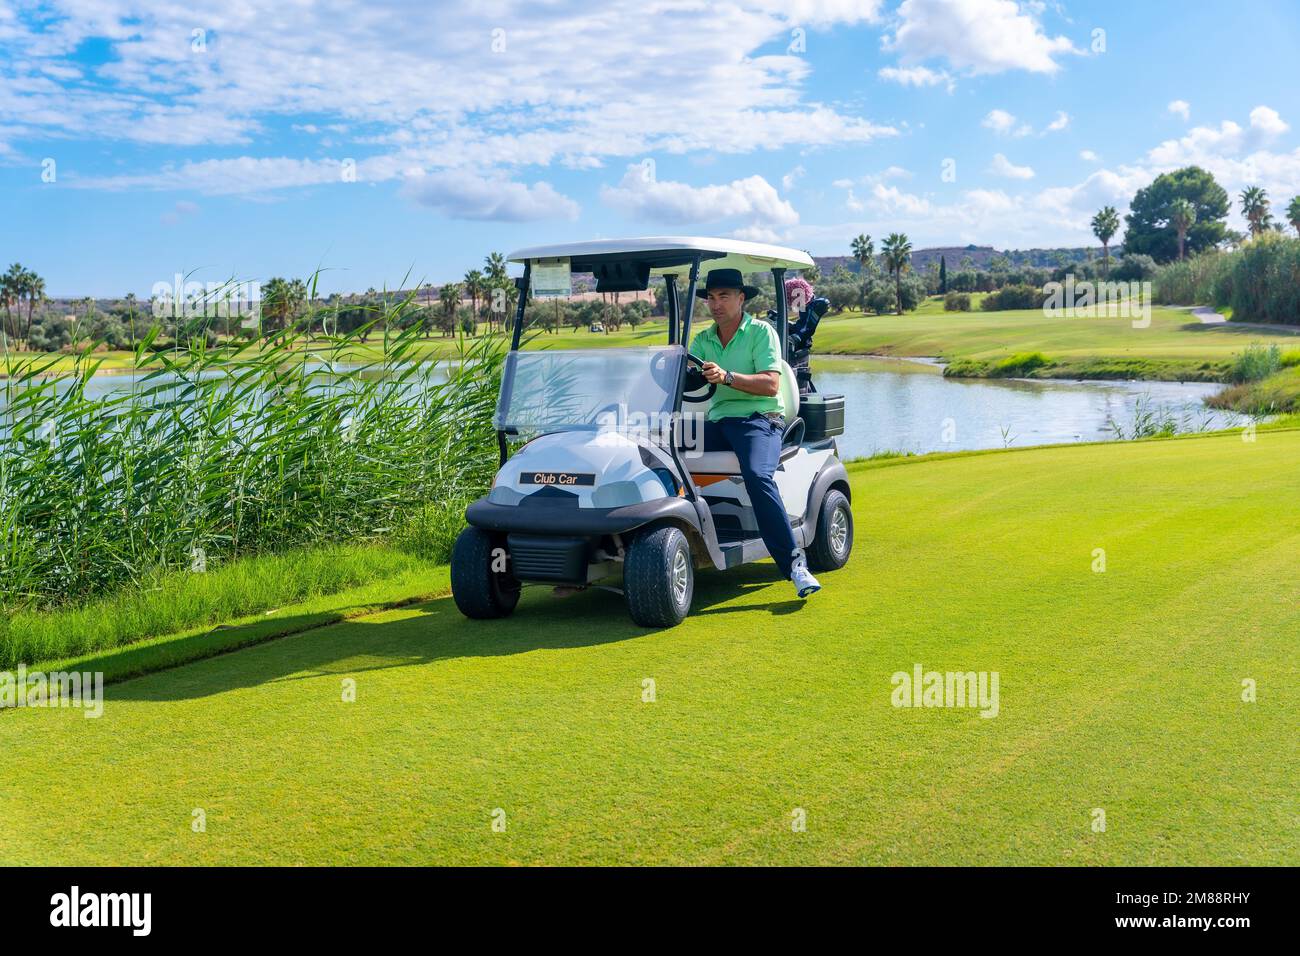 Man playing golf, in the buggy car moving around the golf course Stock Photo